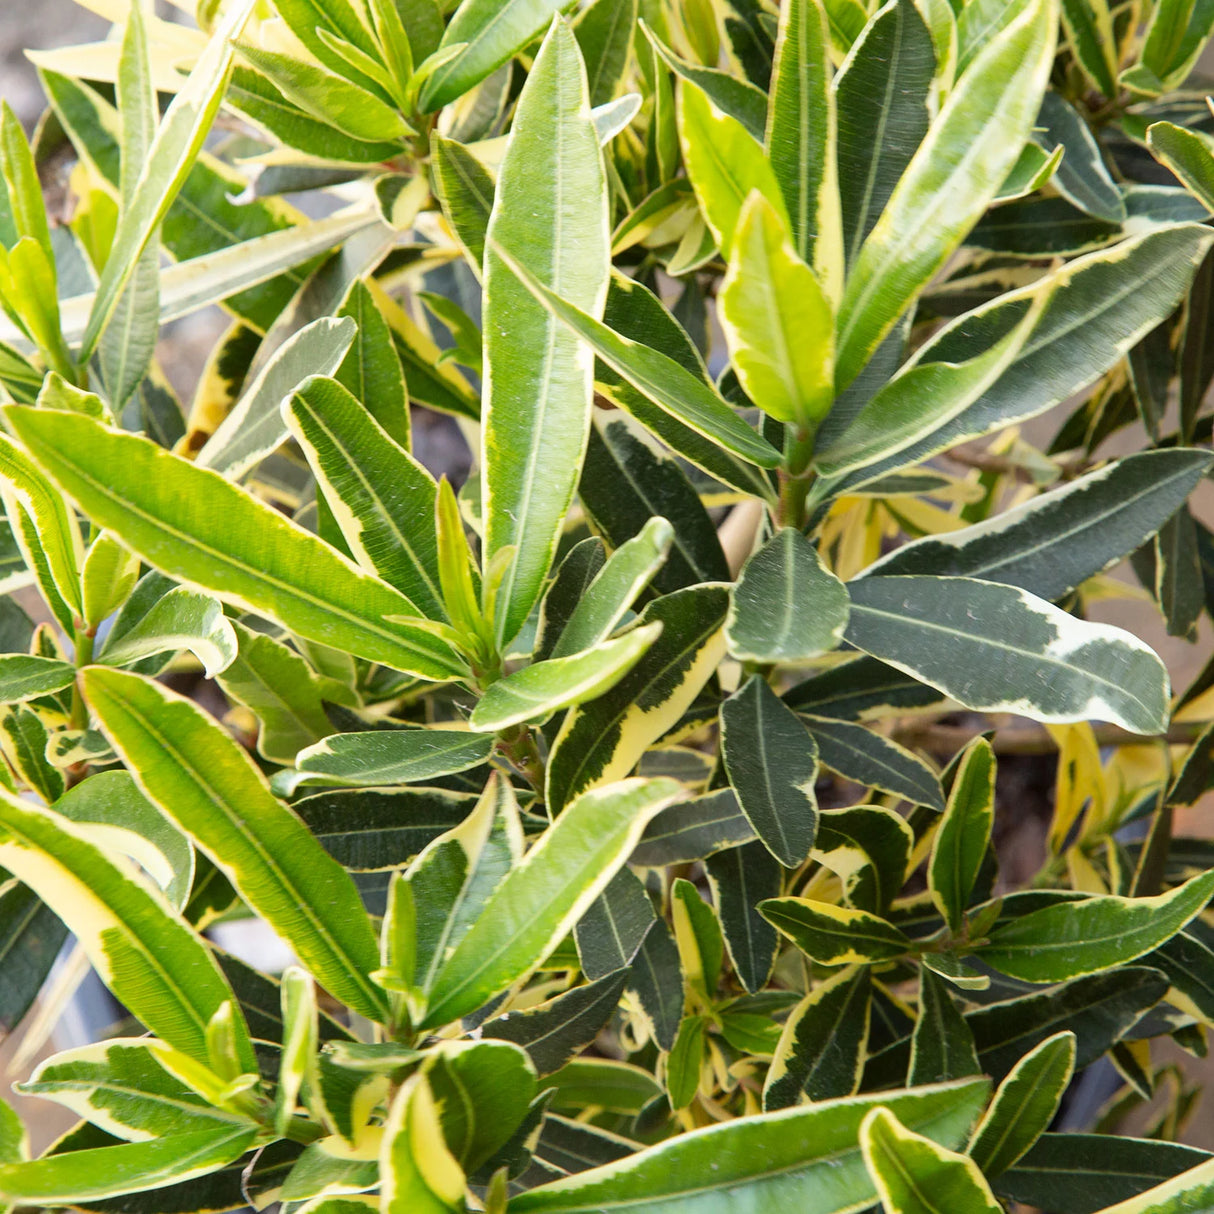 twist of pink oleander evergreen variegated lance shaped foliage dark and lime green leathery